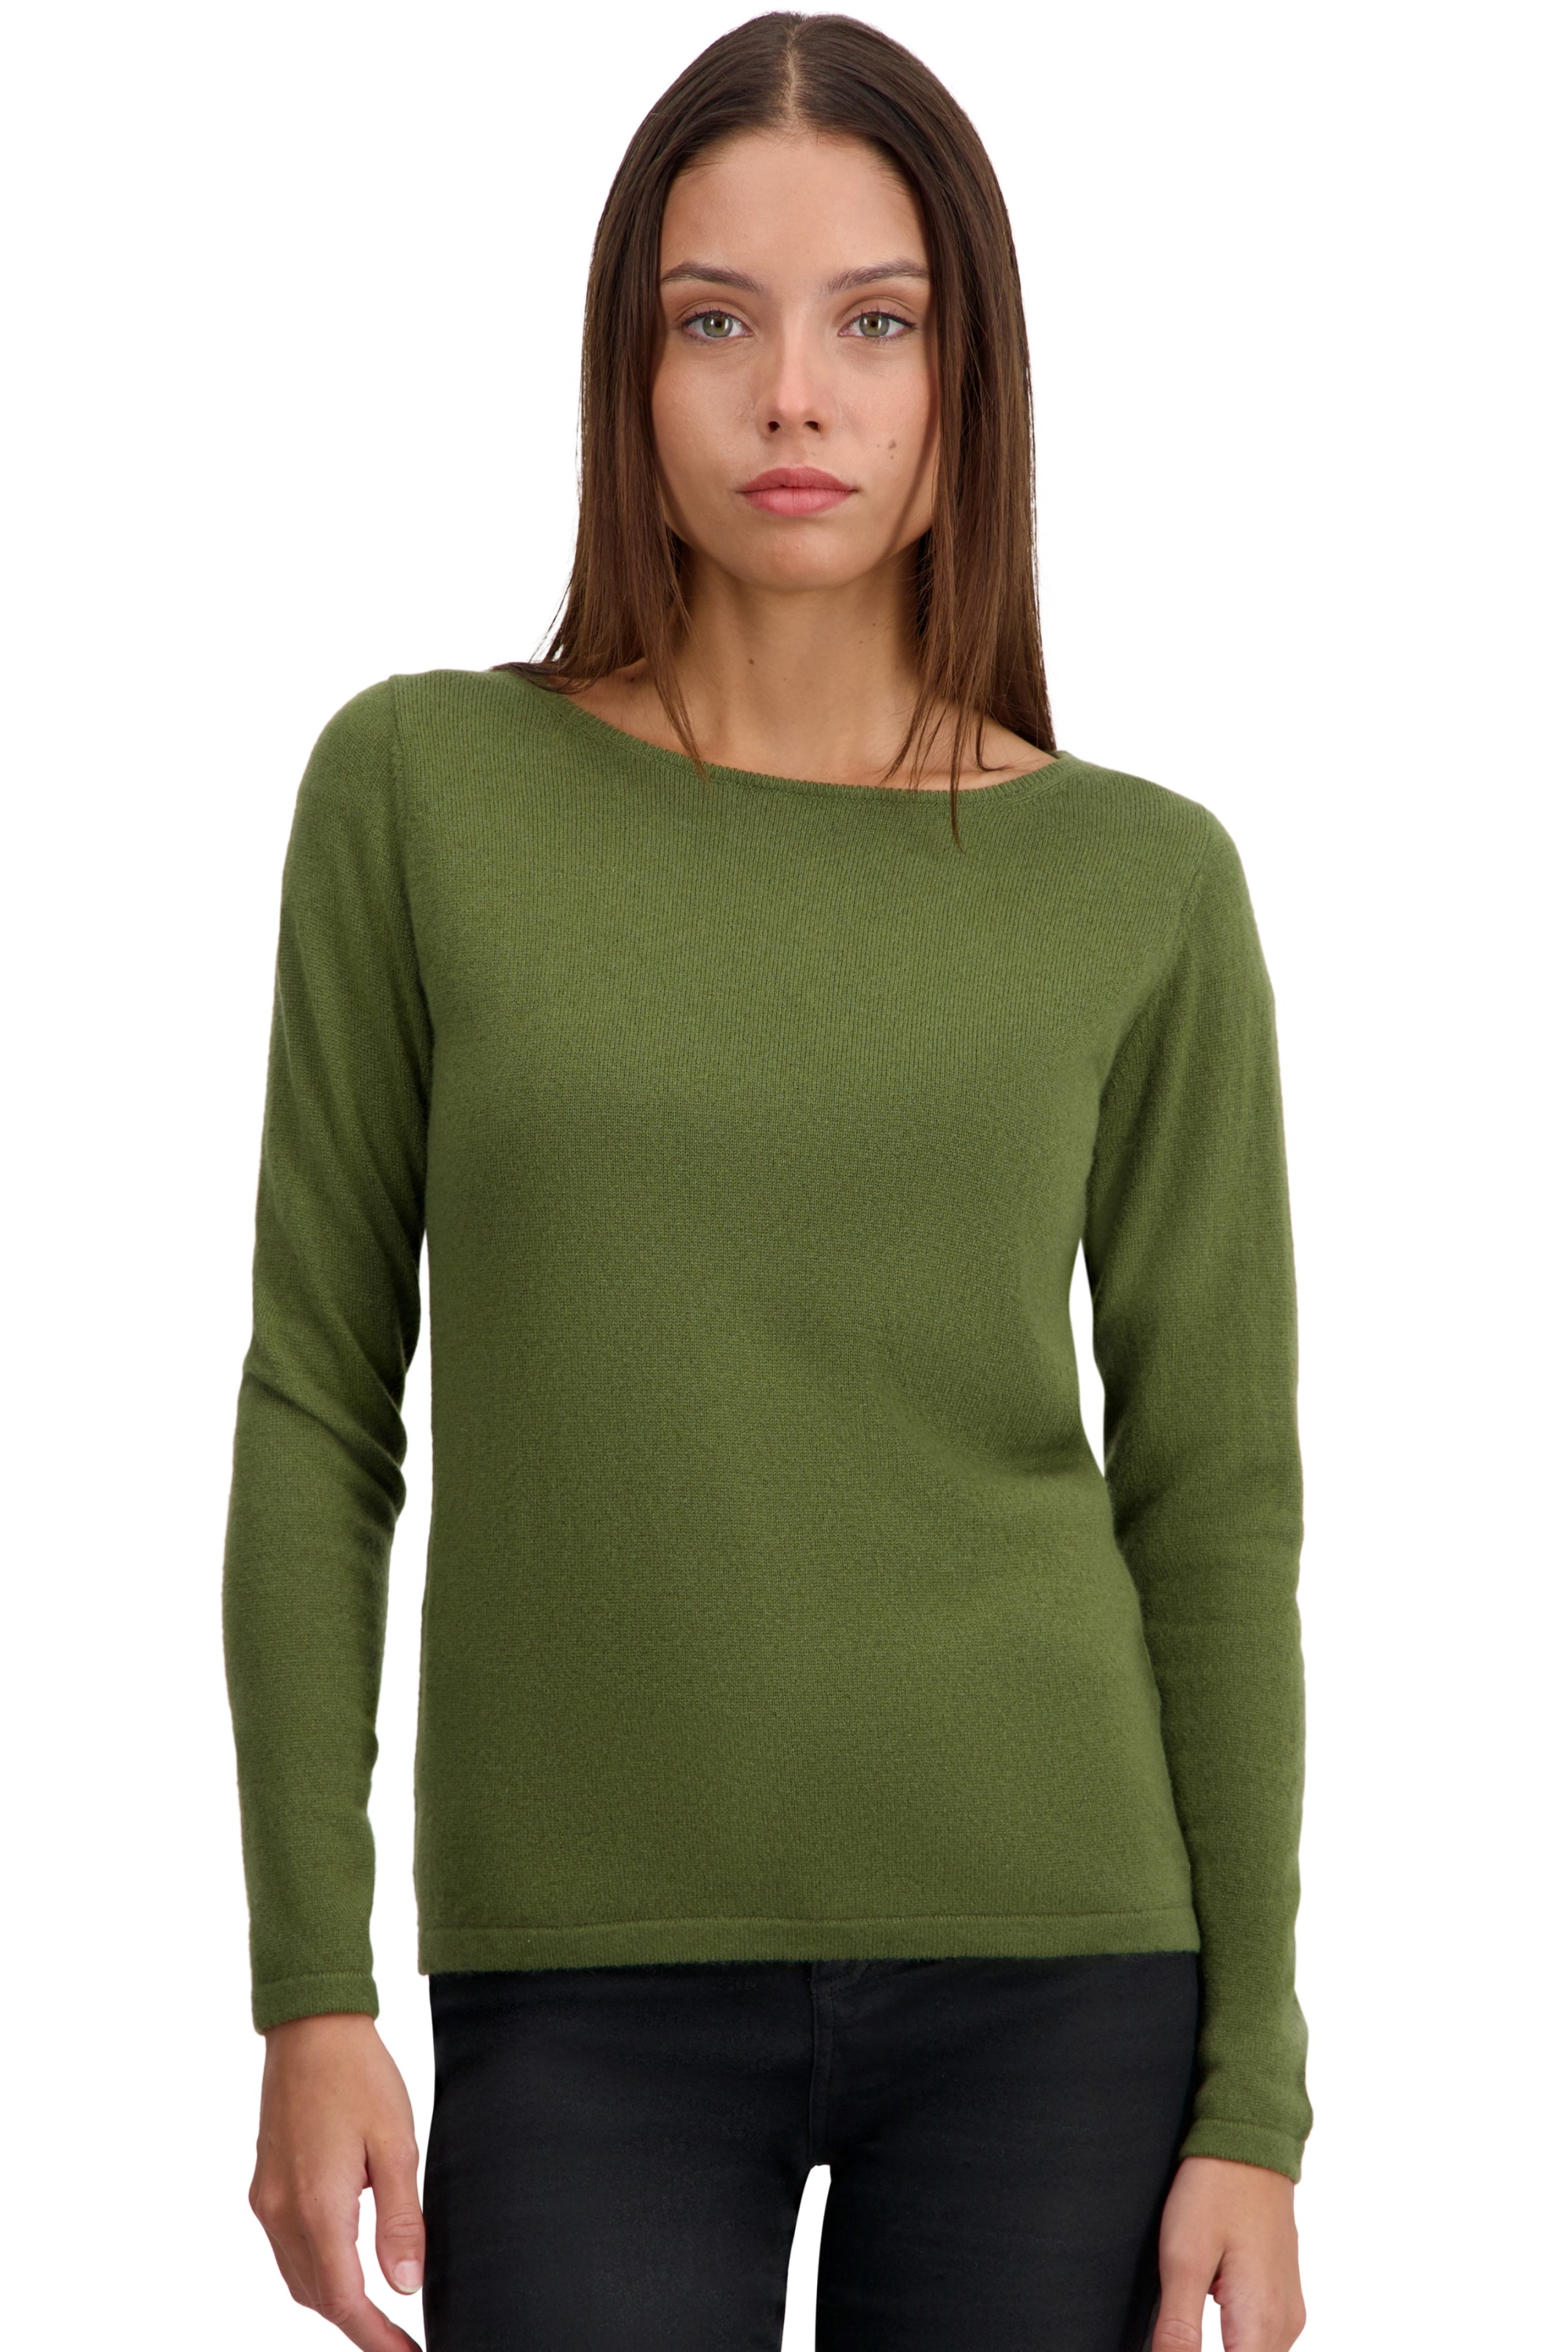 Cashmere cashmere donna tennessy first olive m